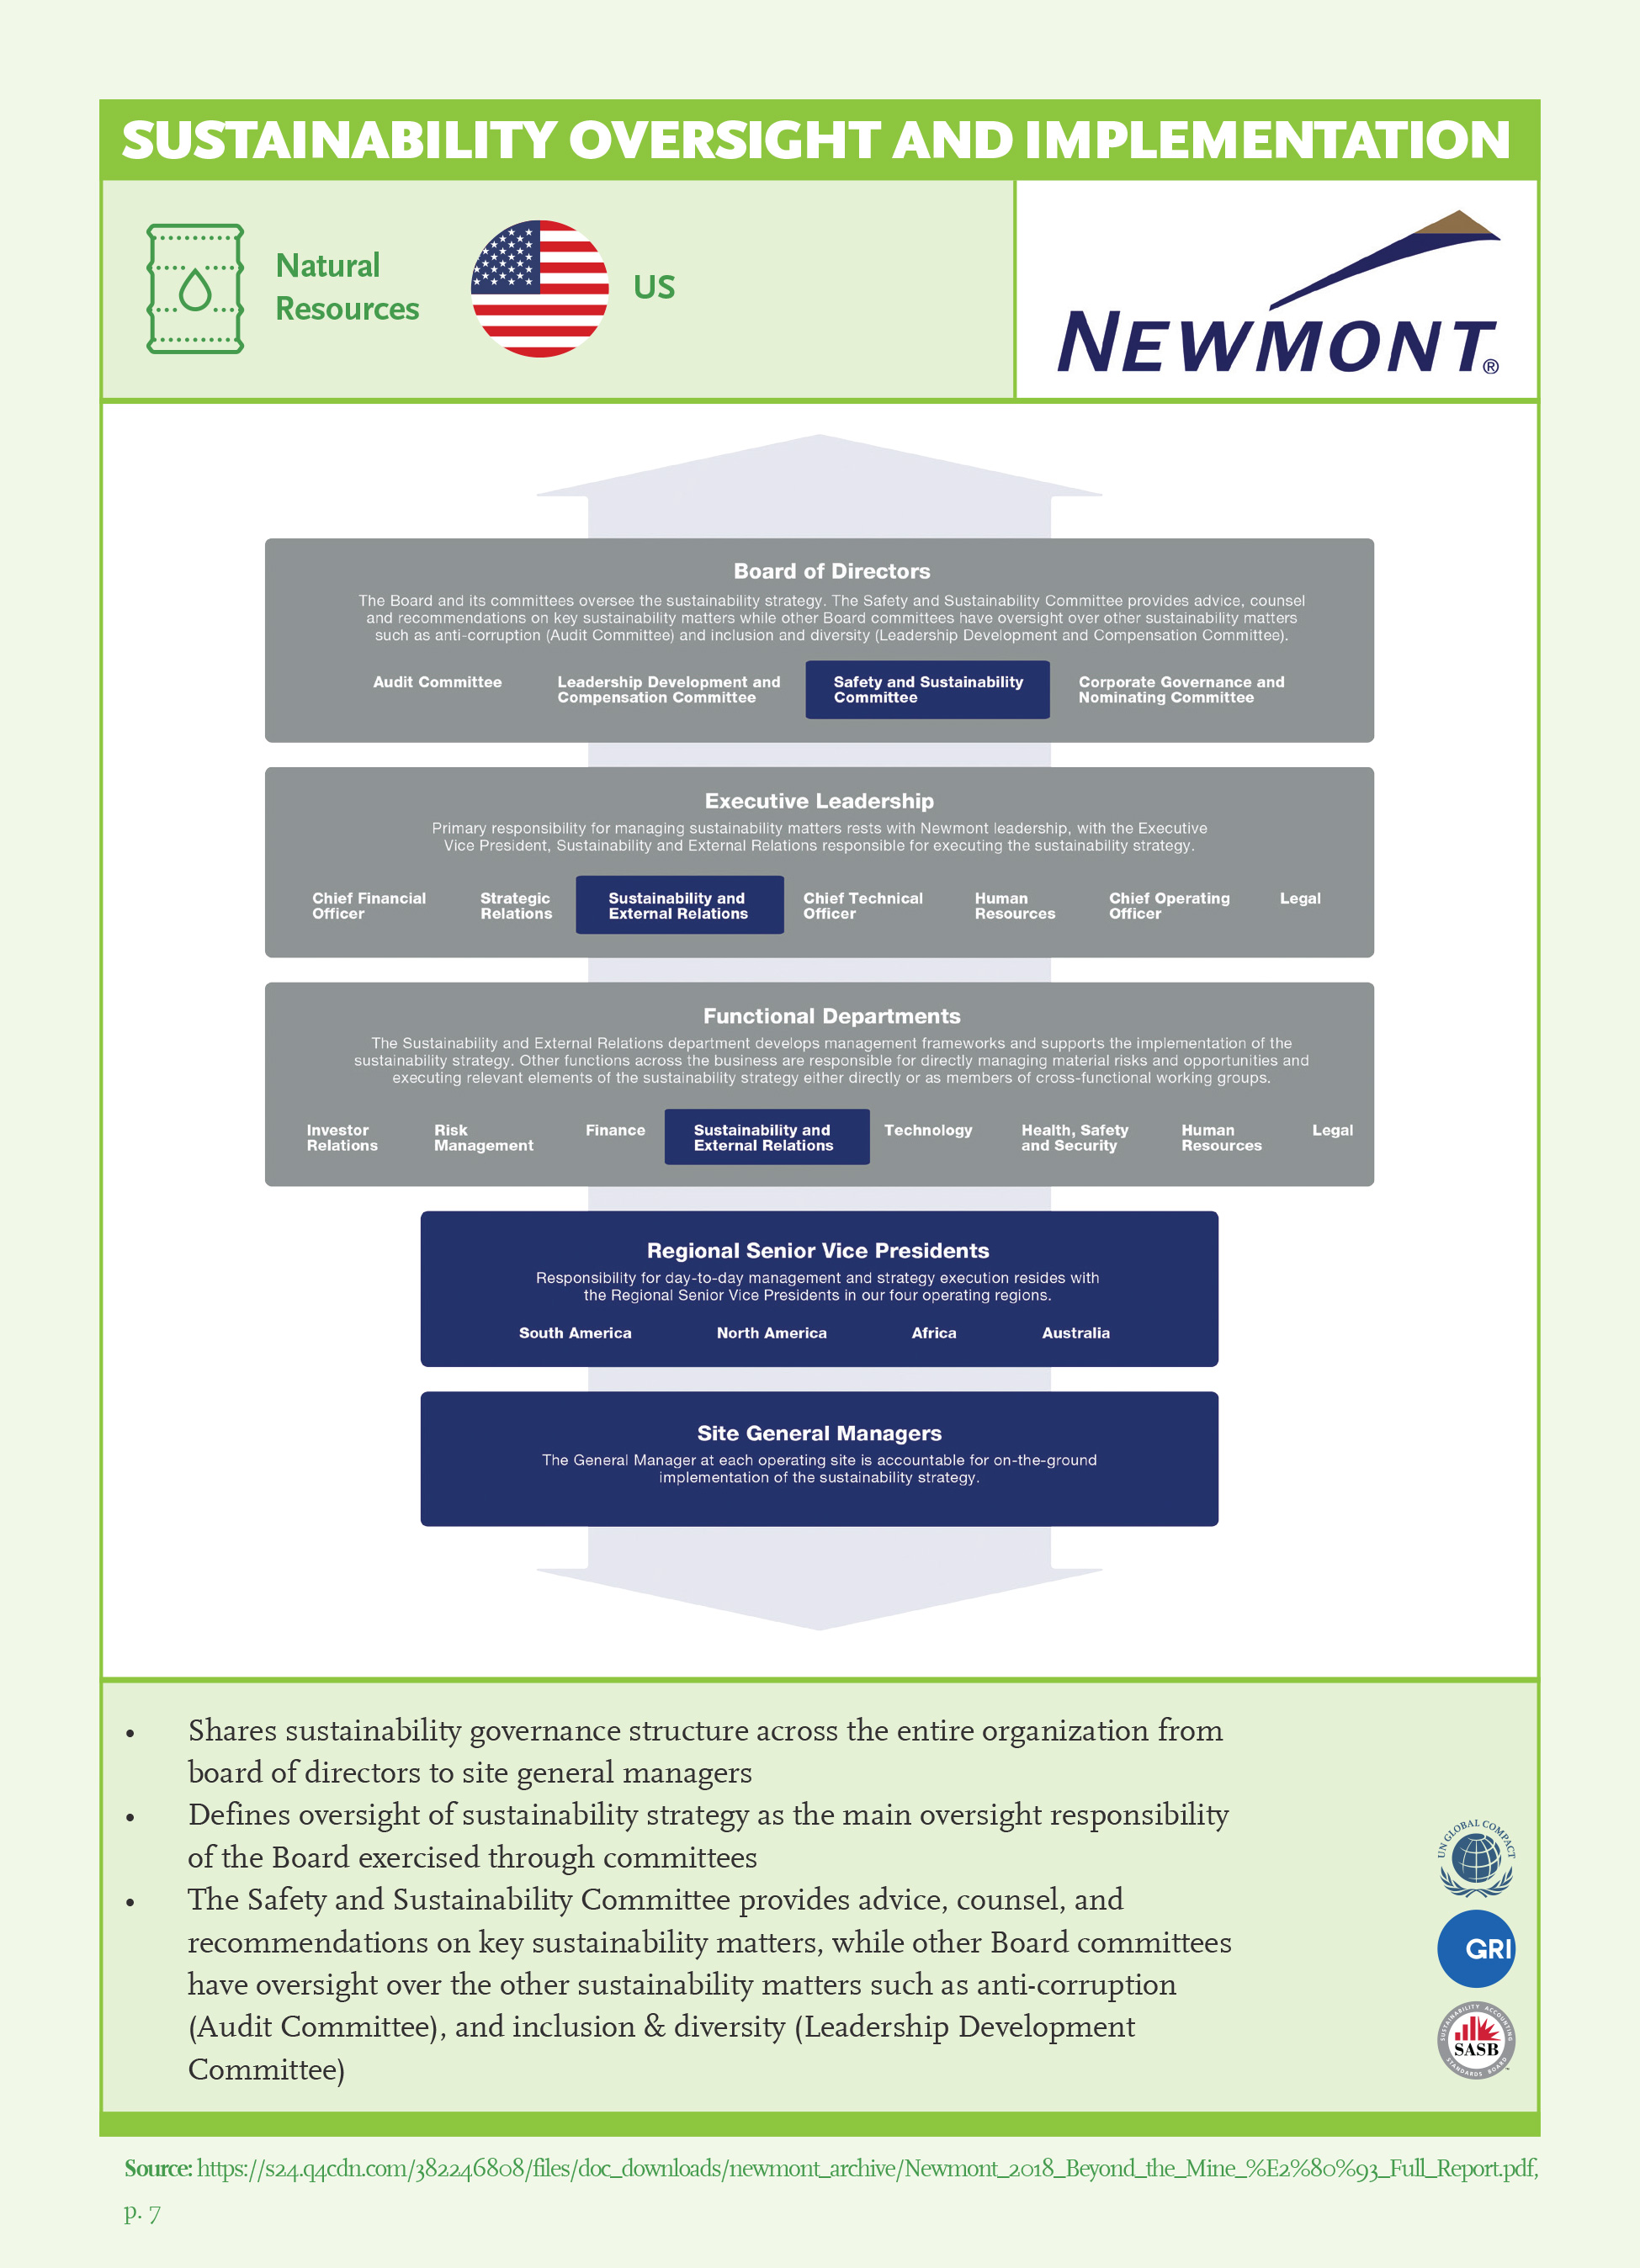 Sustainability Oversight and Implementation: Newmont